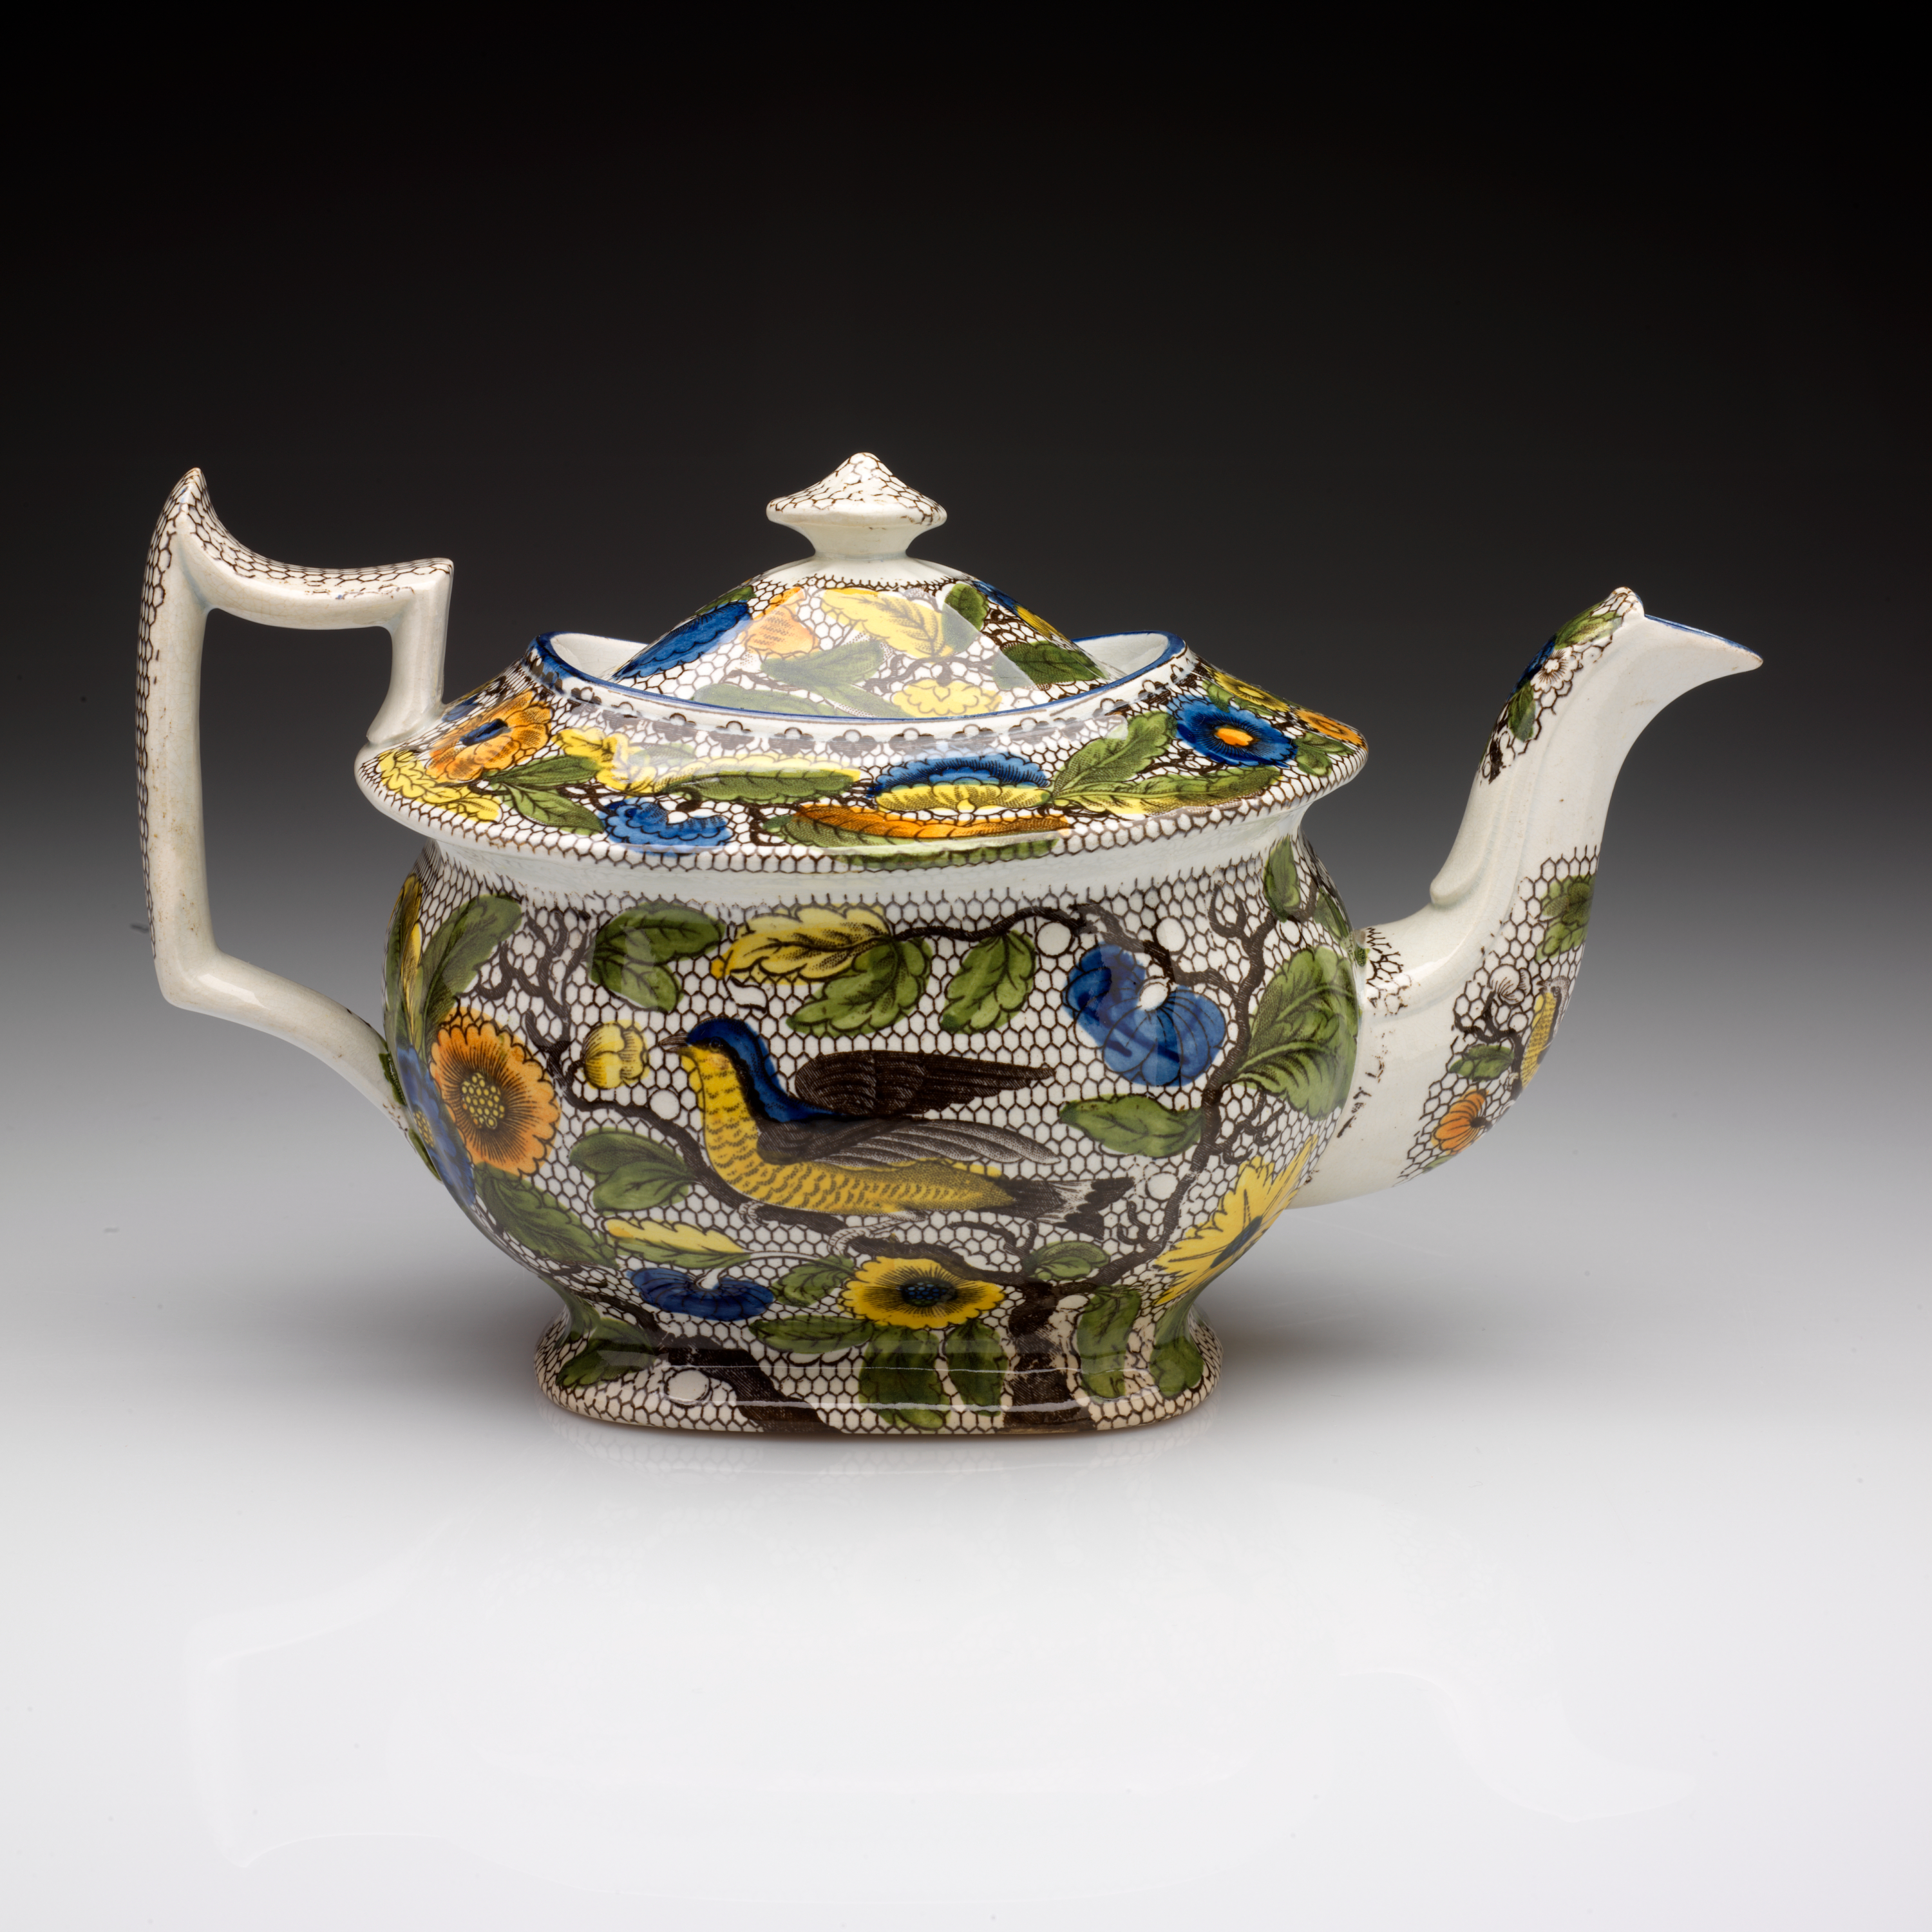 /An%20angular%20transfer-printed%20earthenware%20teapot%20with%20white%2C%20black%2C%20yellow%2C%20green%2C%20and%20blue%20decorations.